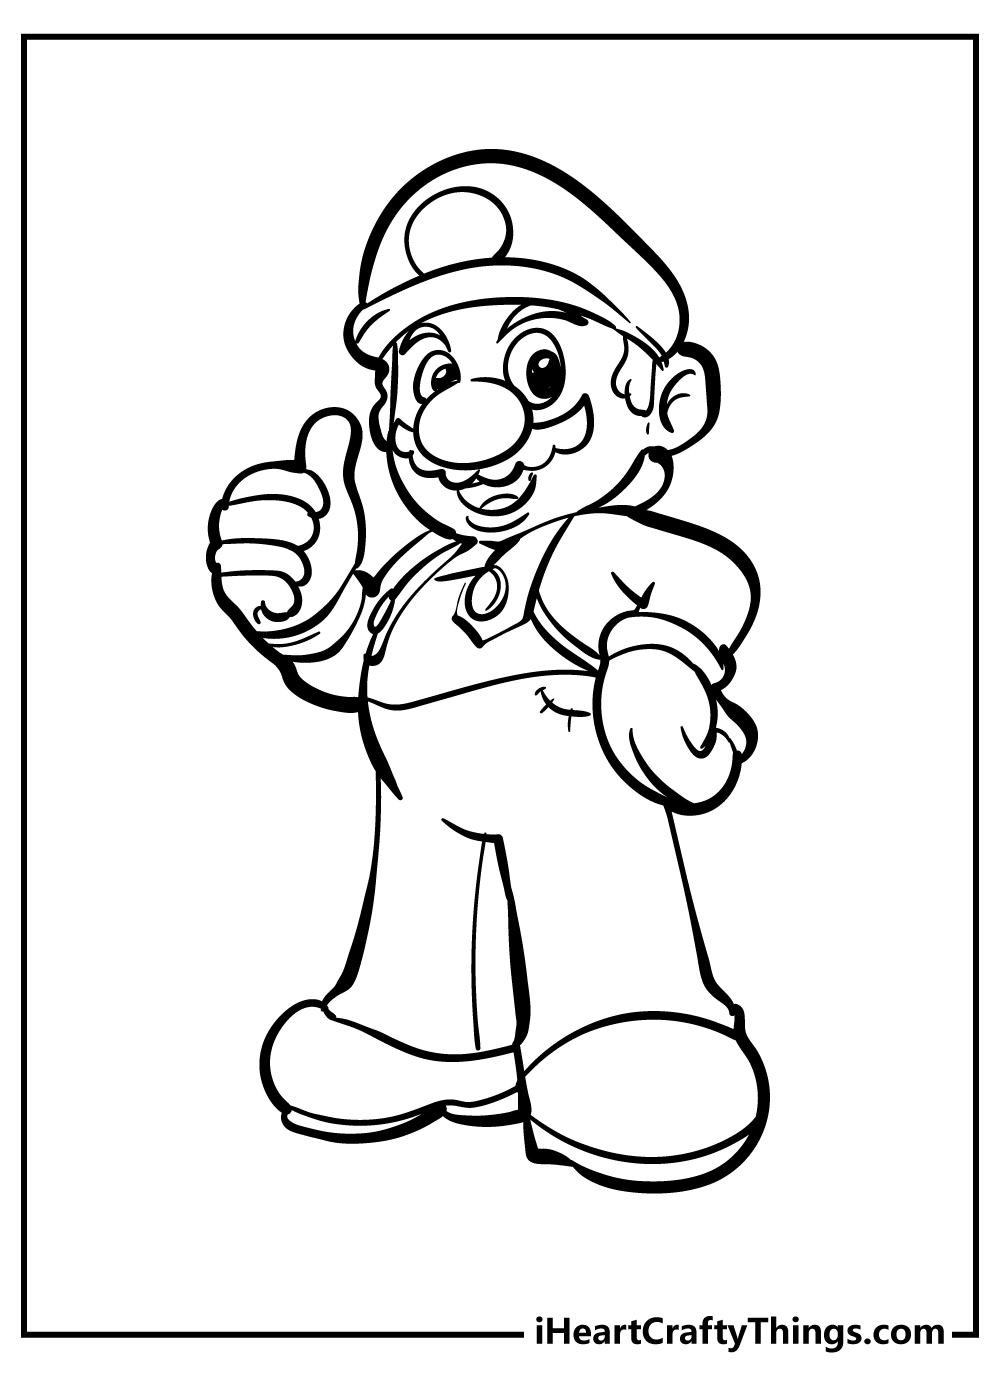 Super Mario Bros Coloring Pages   New And Exciting 20